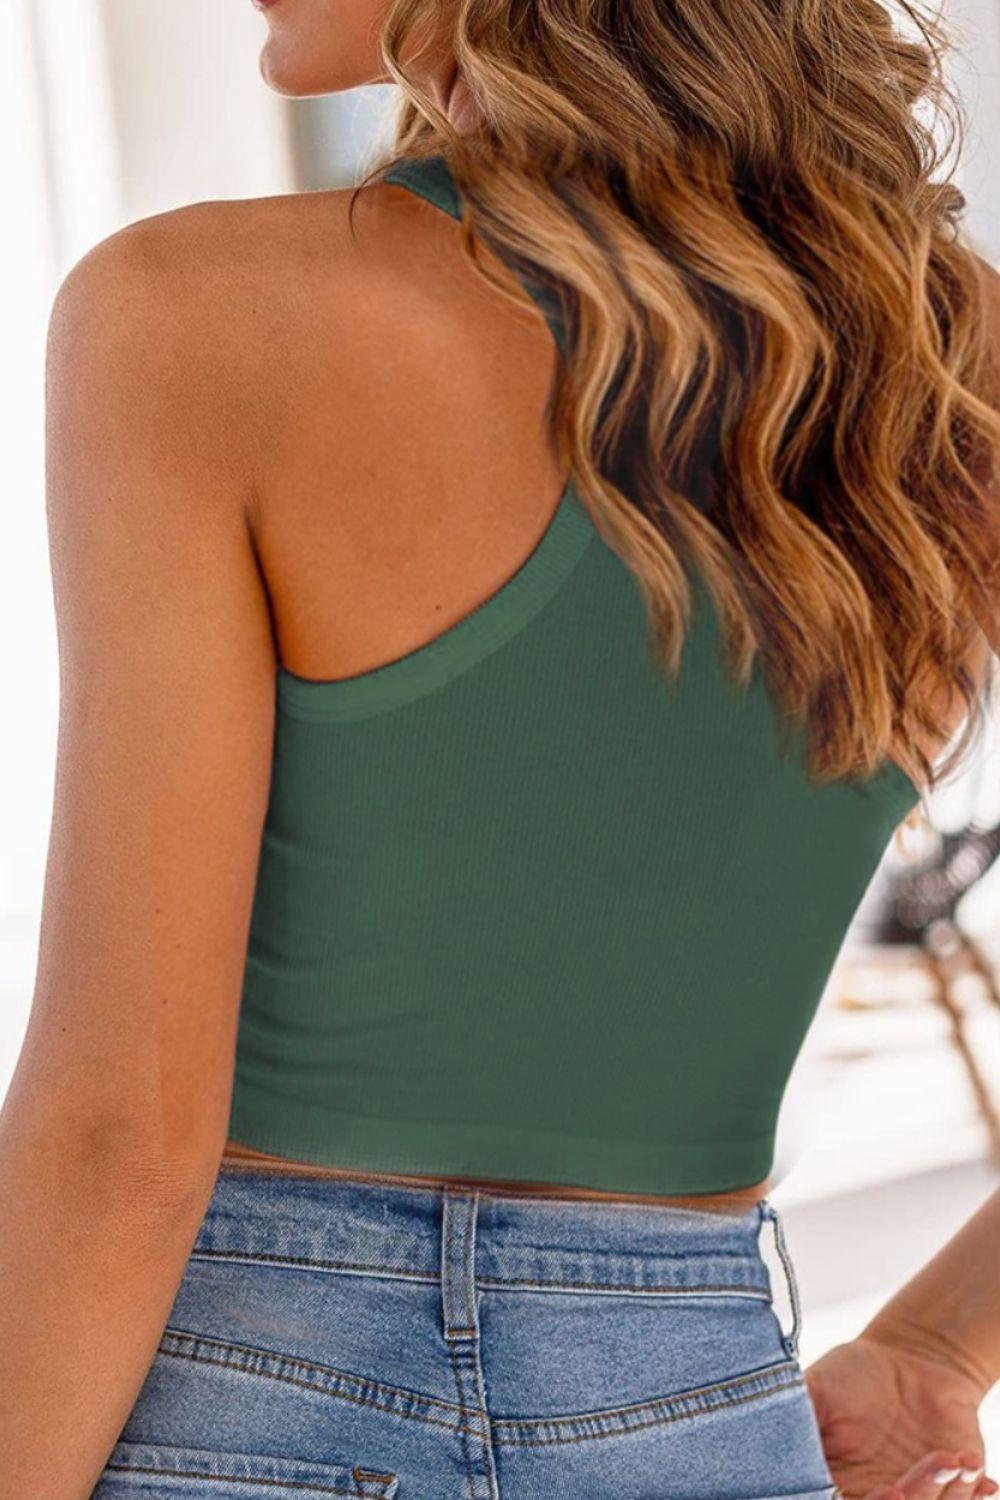 a woman wearing a green top and jeans